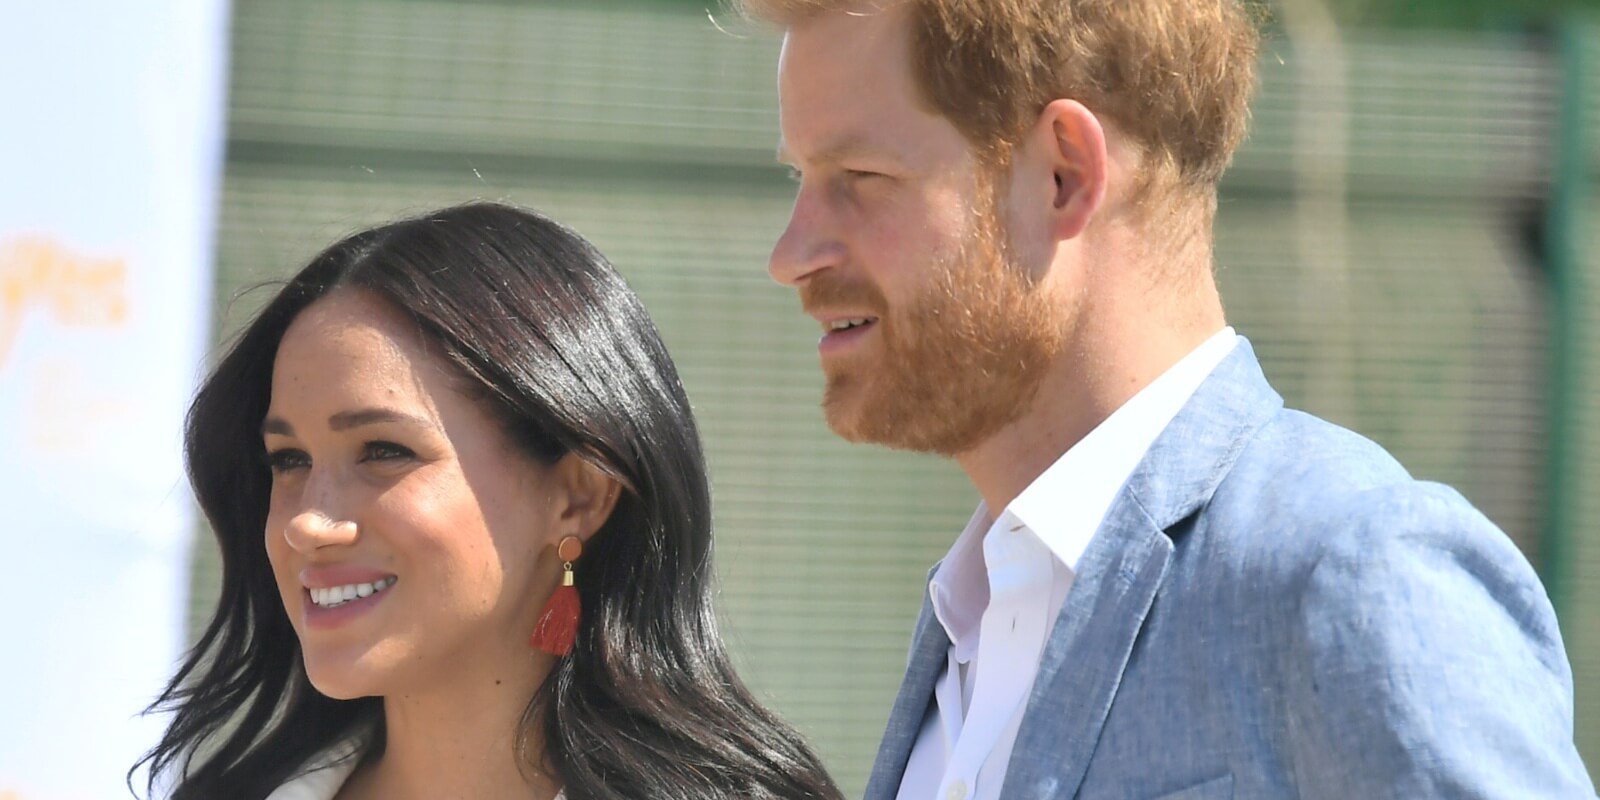 Meghan Markle and Prince Harry visit the township of Tembisa during their royal tour of South Africa on October 02, 2019 in Various Cities, South Africa.